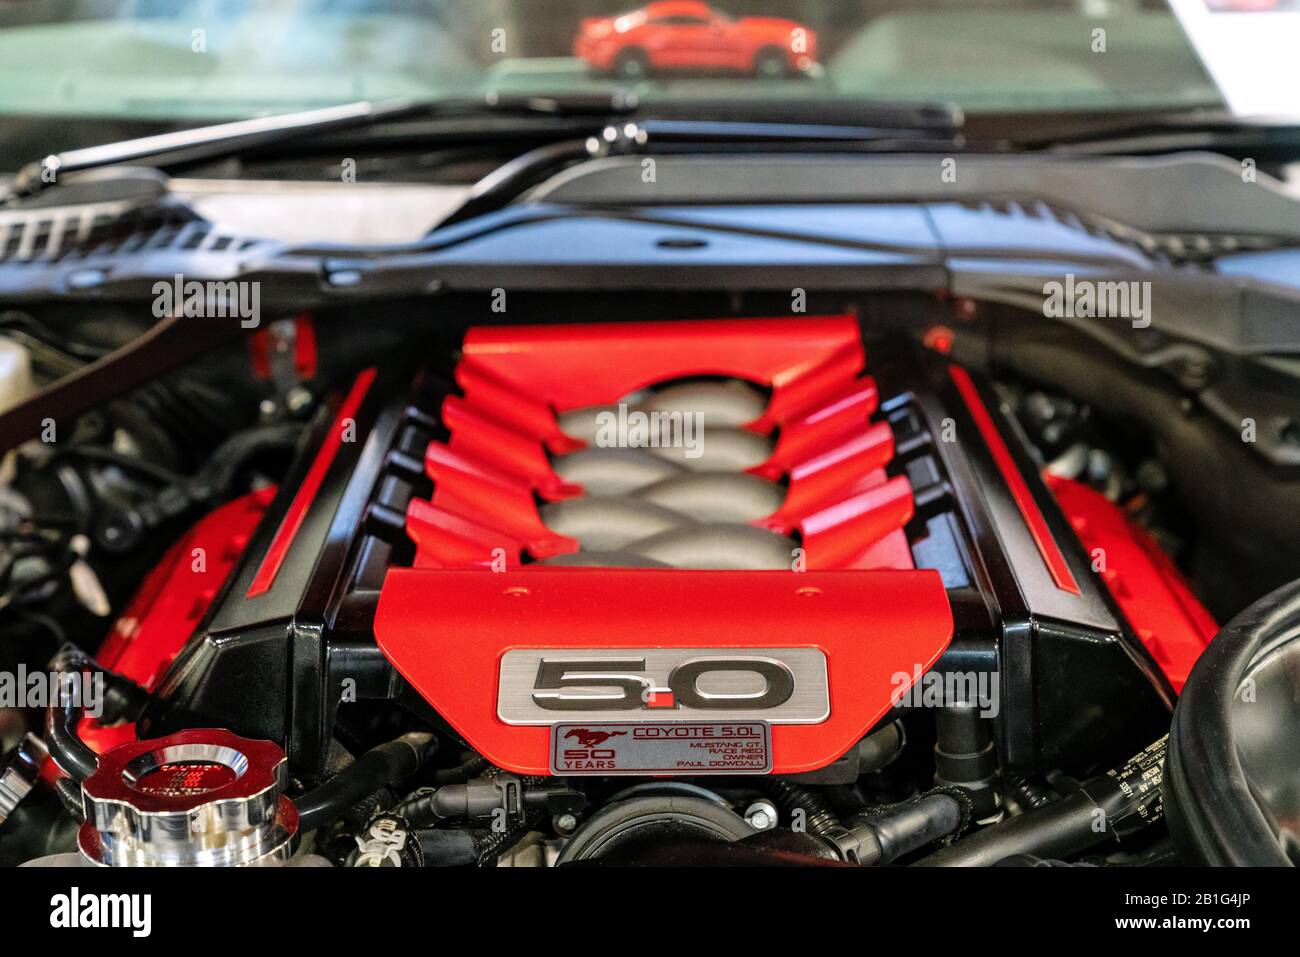 22 Feb 2020 - London, UK. Close up detail of the modular V8 engine with a 5.0L displacement named Coyote. Stock Photo